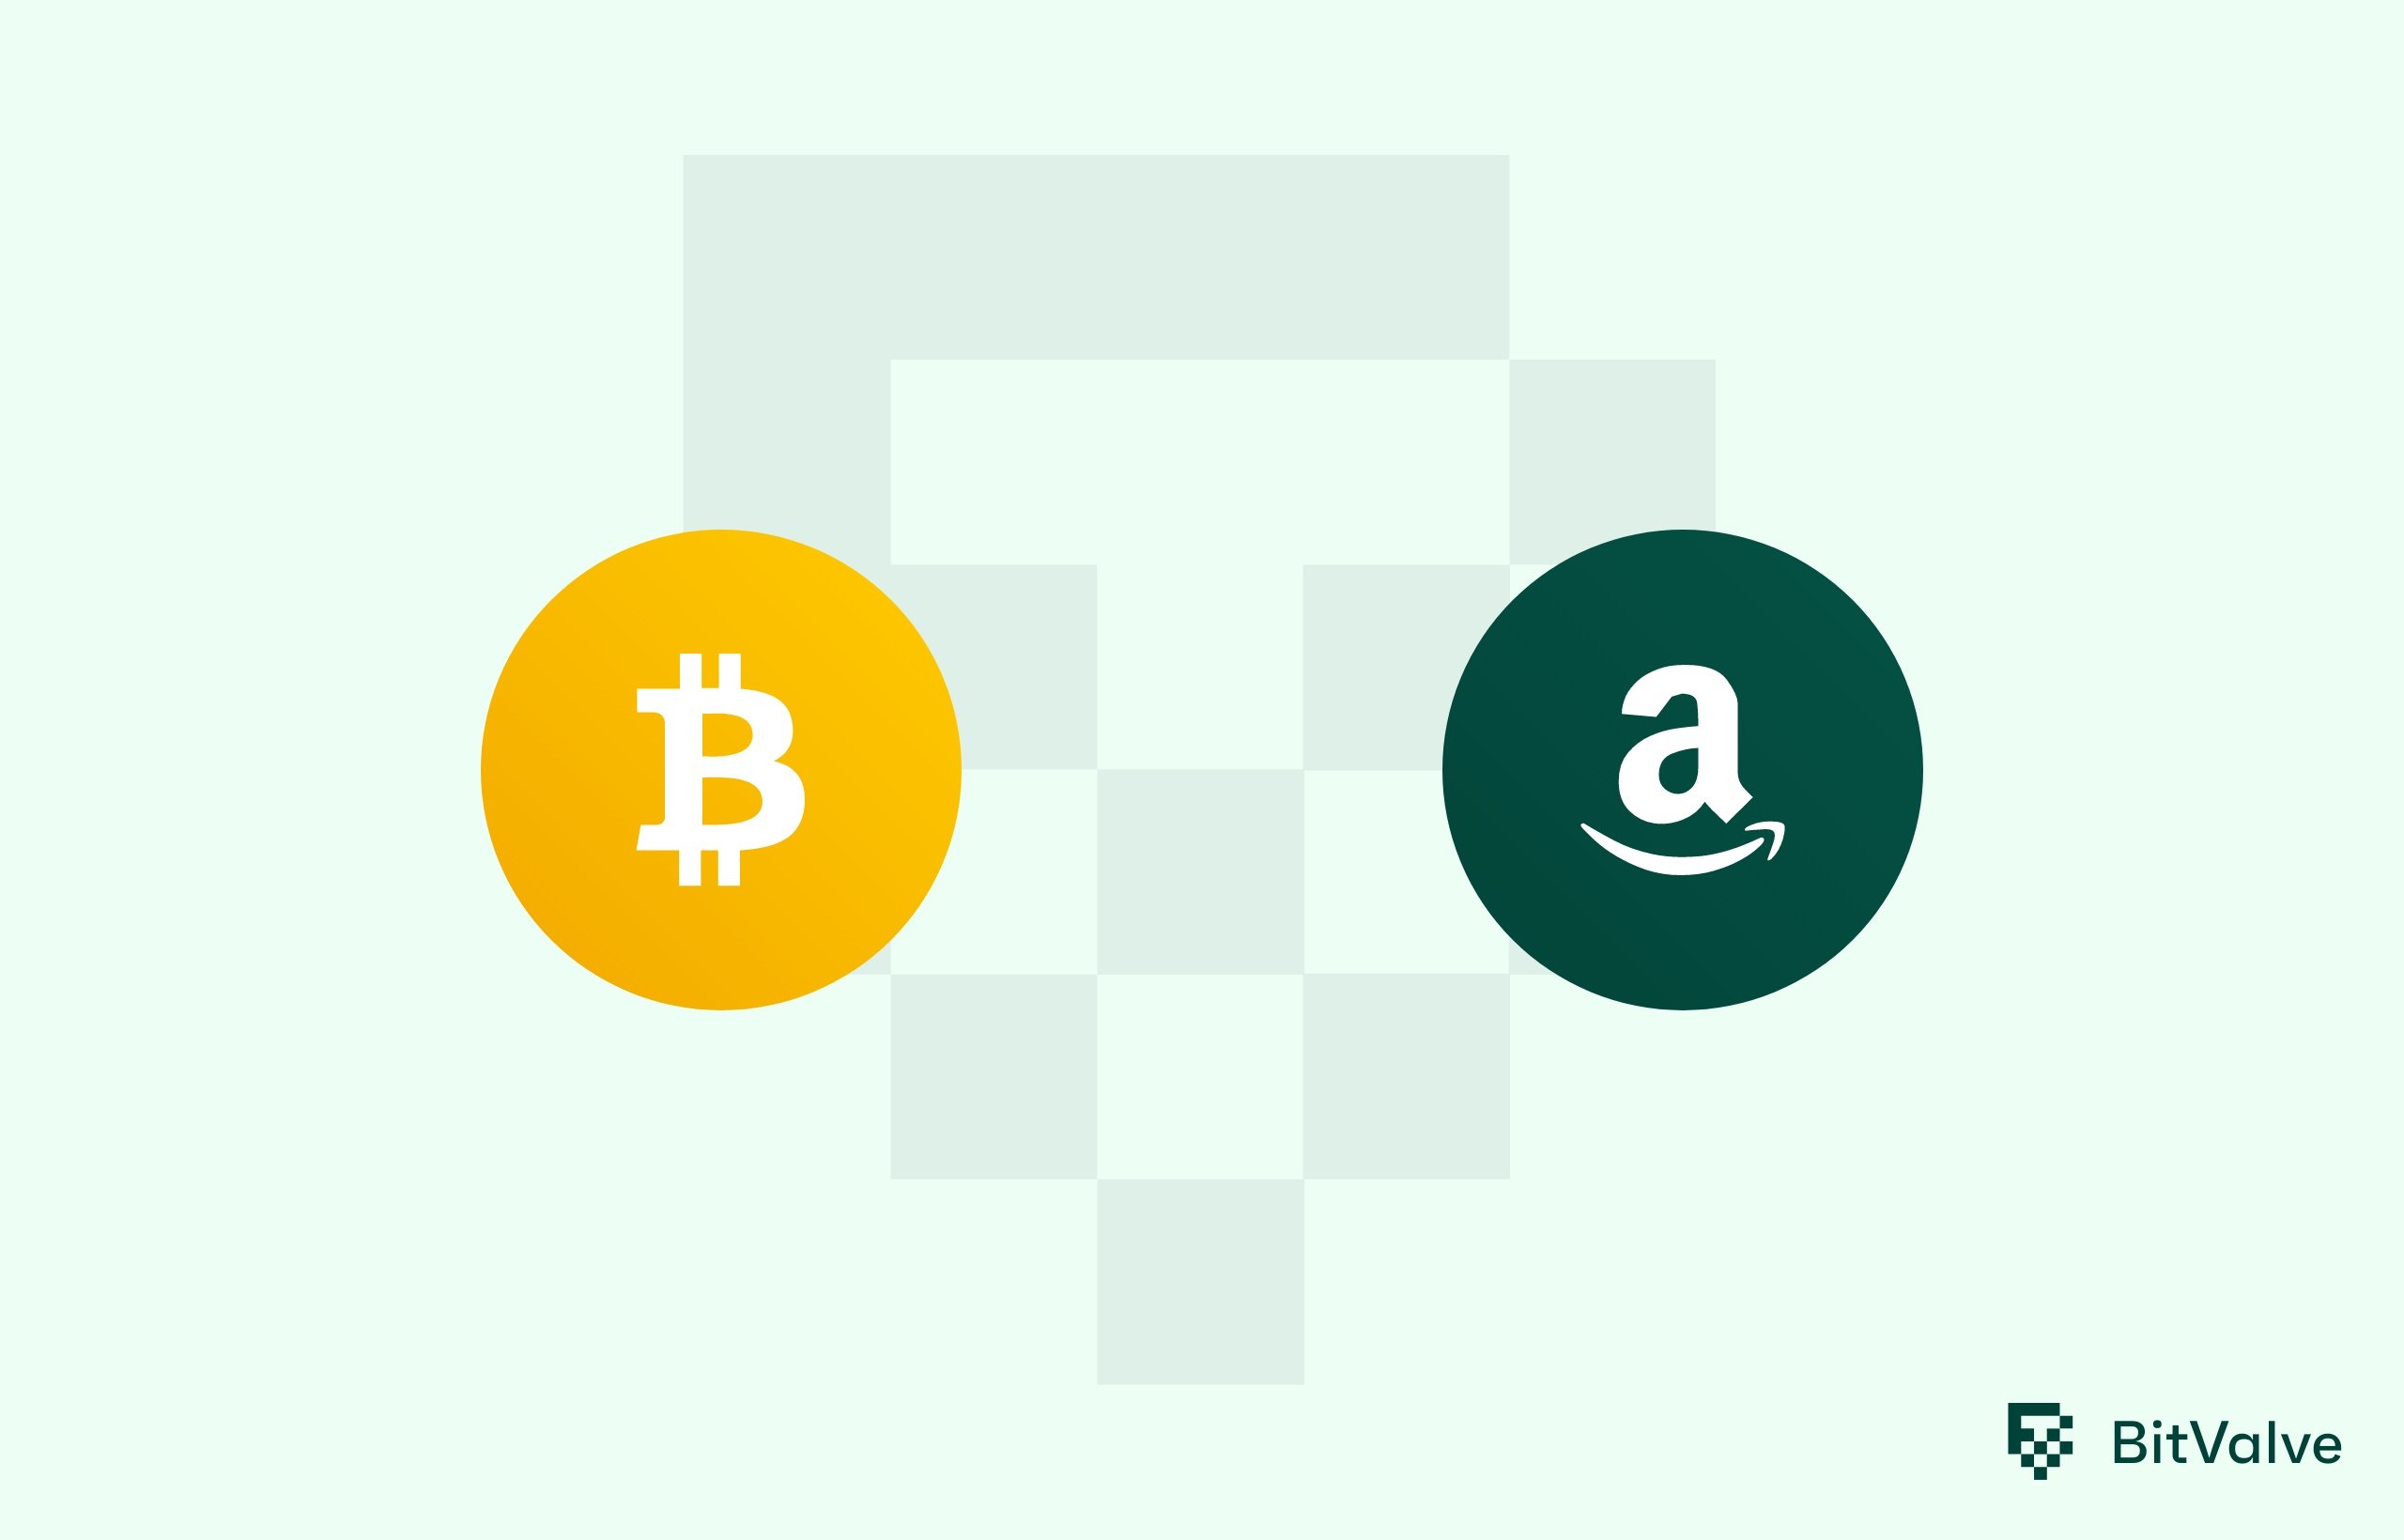 Buy Bitcoin with Amazon Gift Cards | Sell Amazon Gift Card to Crypto Instantly | CoinCola